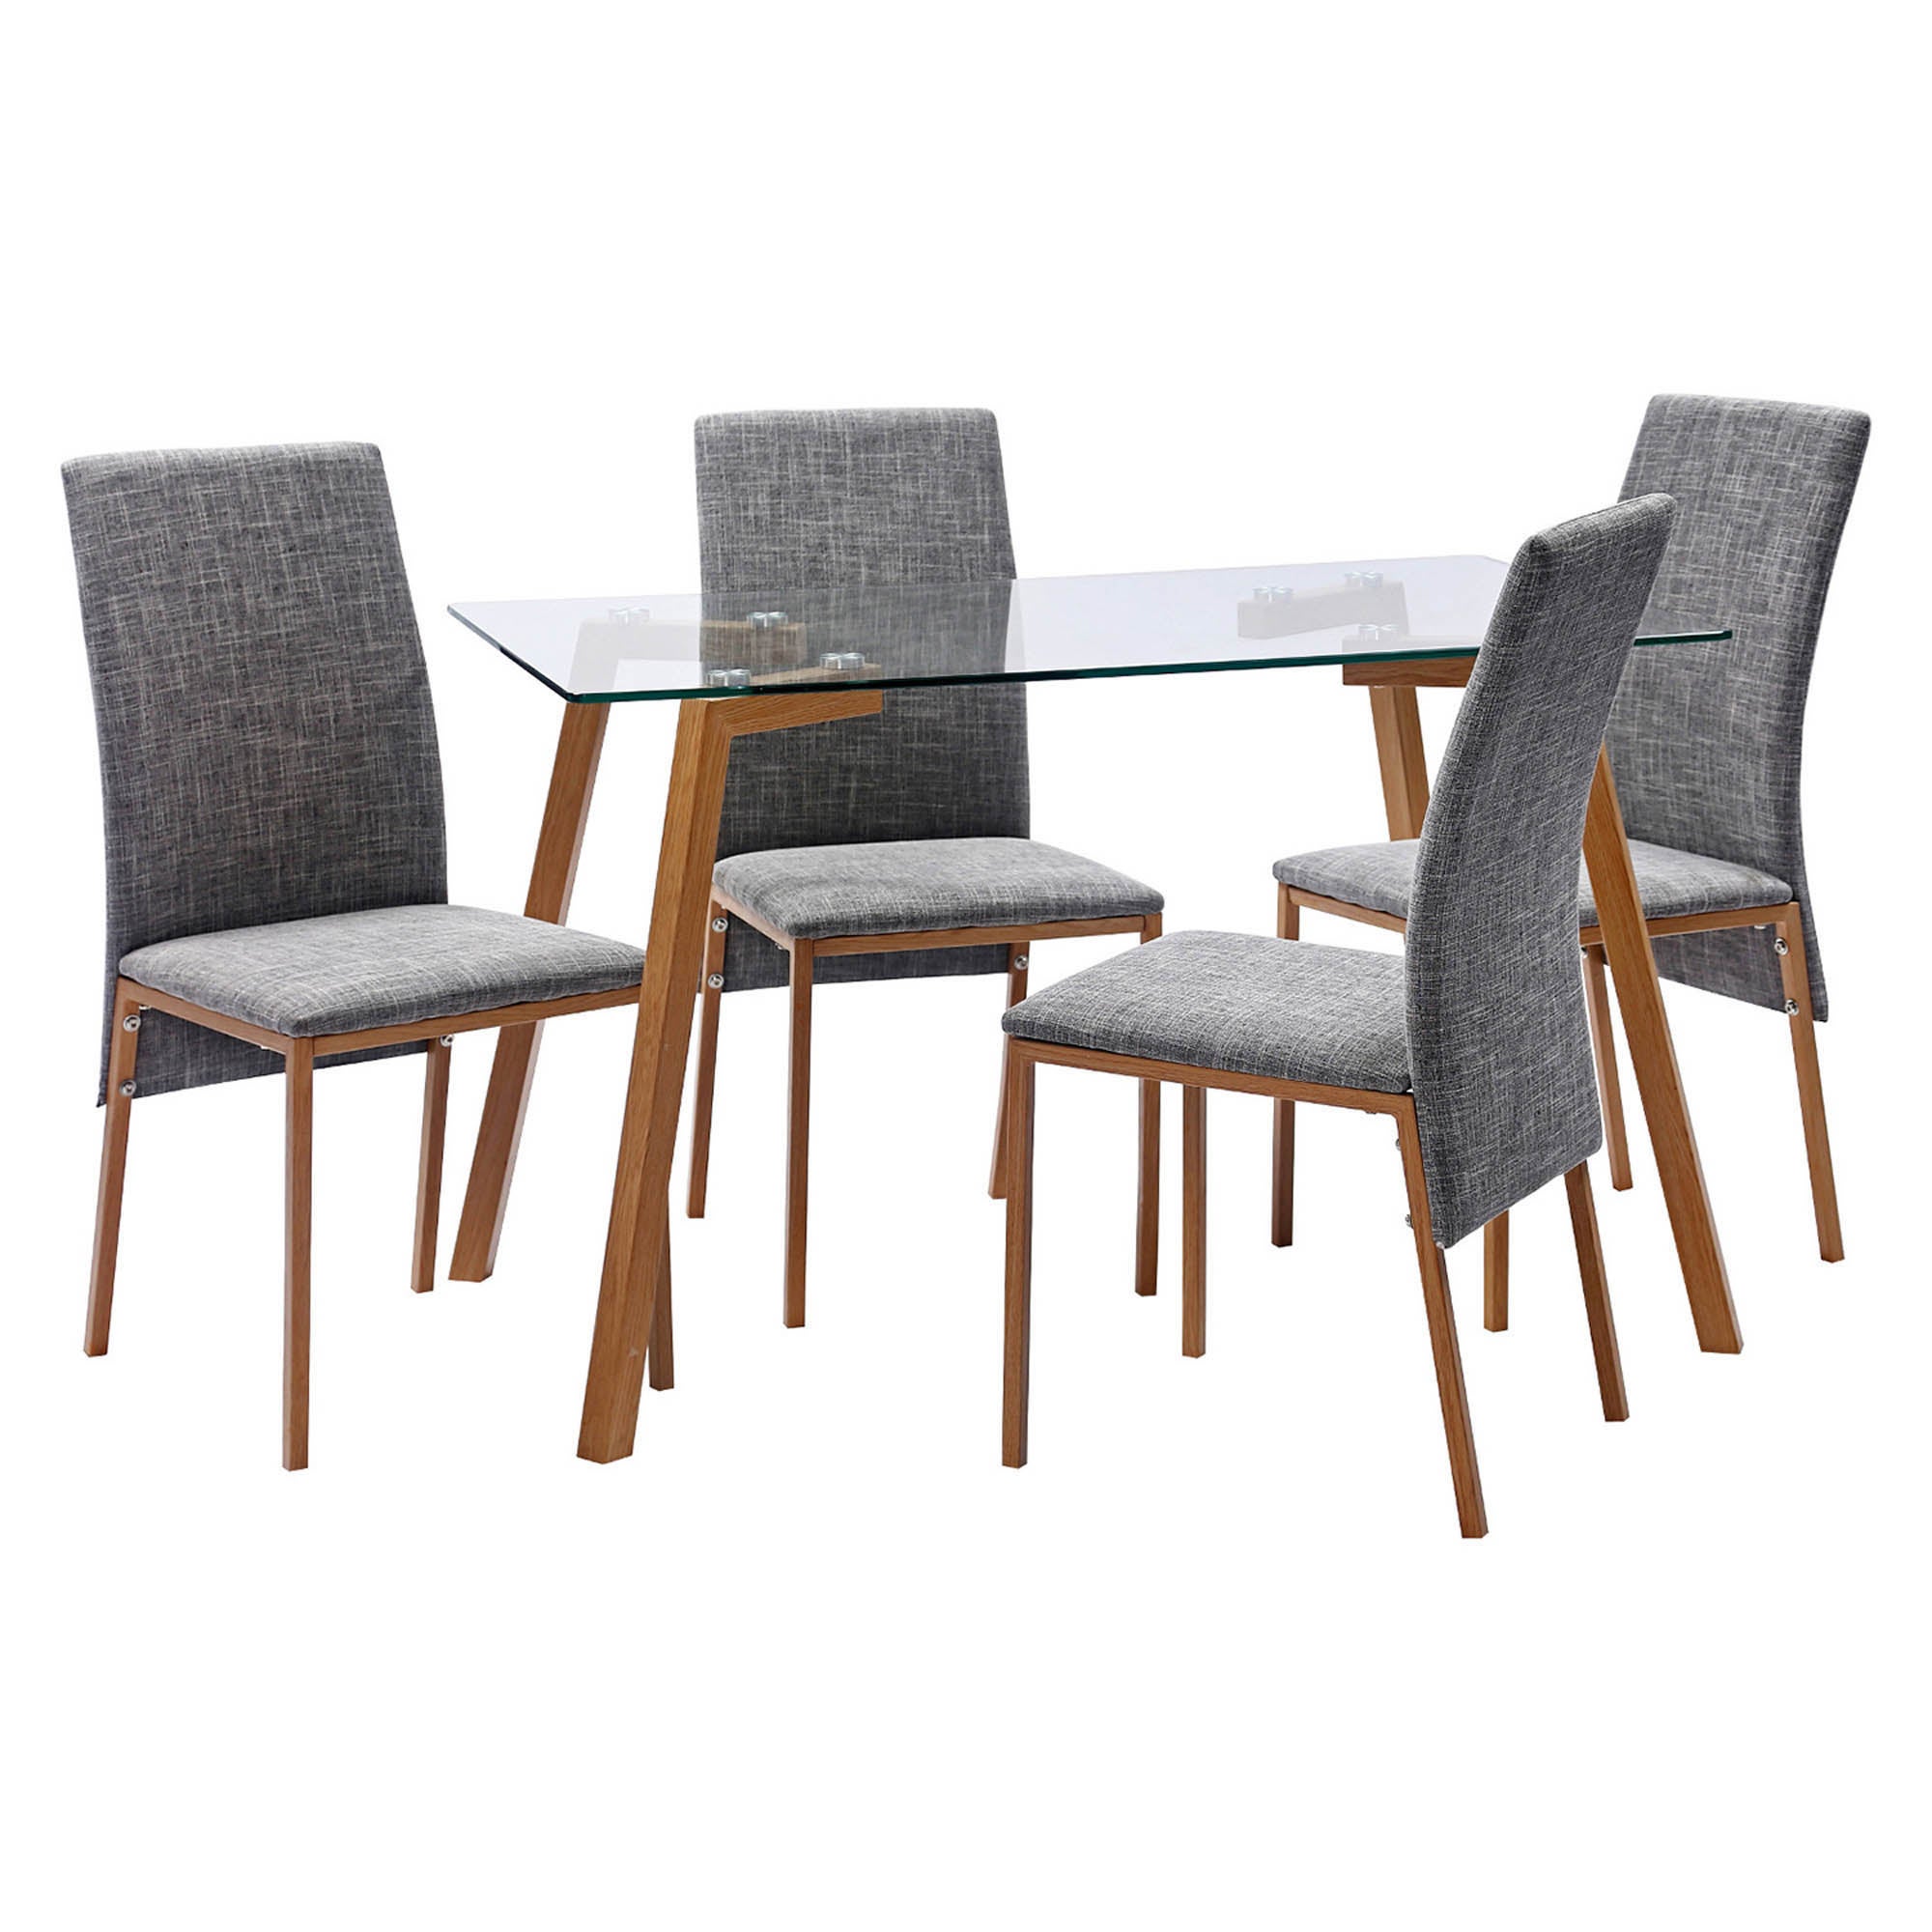 Morton Rectangular Dining Table with 4 Chairs, Grey Glass